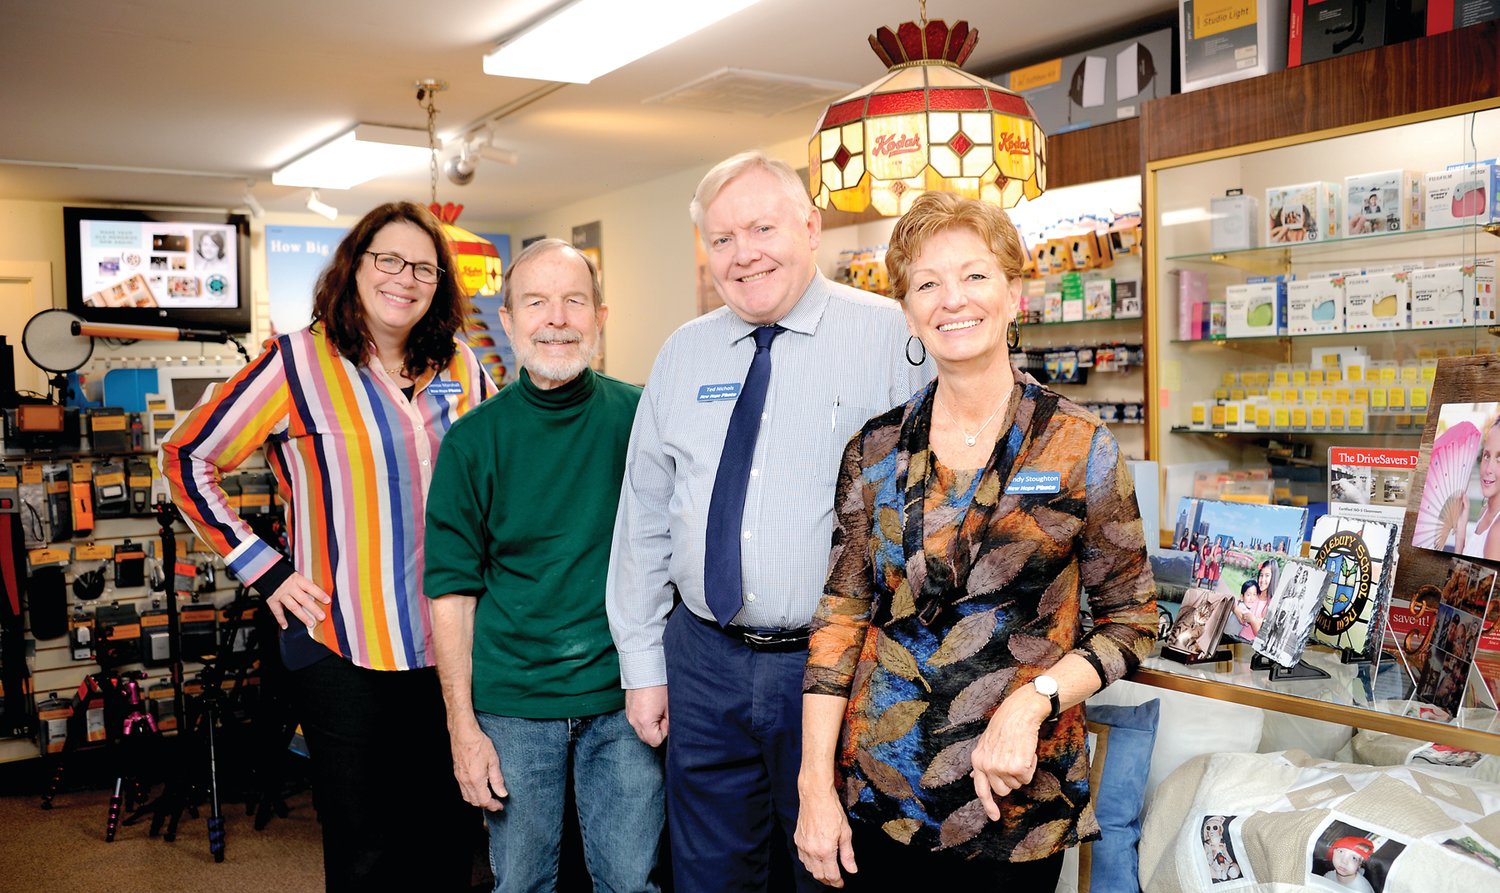 From left are New Hope Photo employees Denise Marshall and John Hoenstine, owner Ted Nichols and employee Cindy Stoughton inside the store. Photograph by Carol Ross.